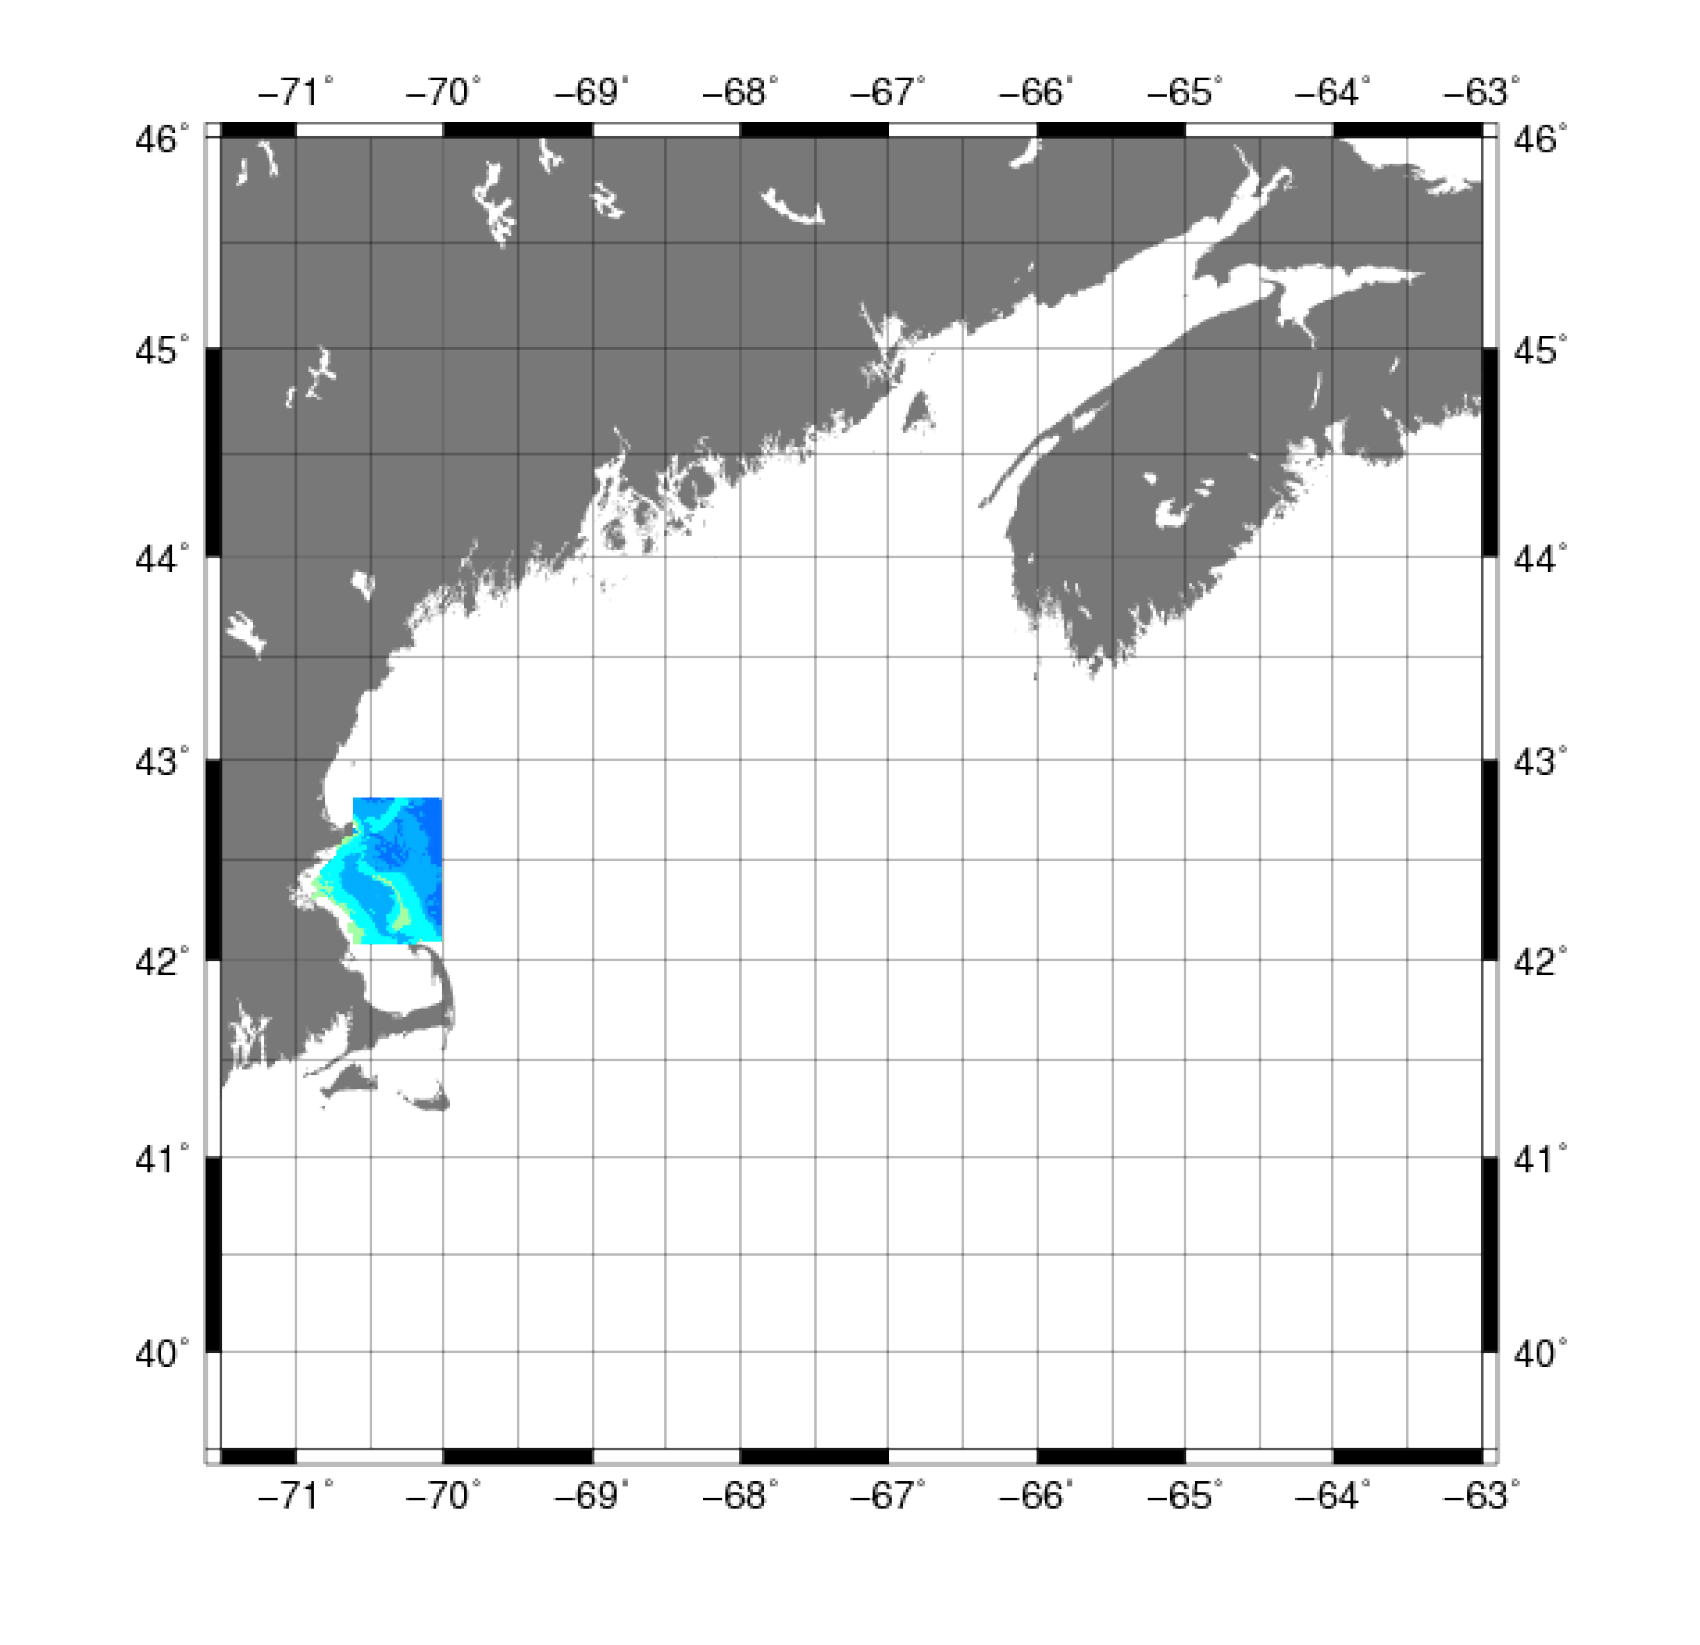 thumbnail image and link to larger image of a map showing bathymetry data for stellwagen bank and massachusetts bay